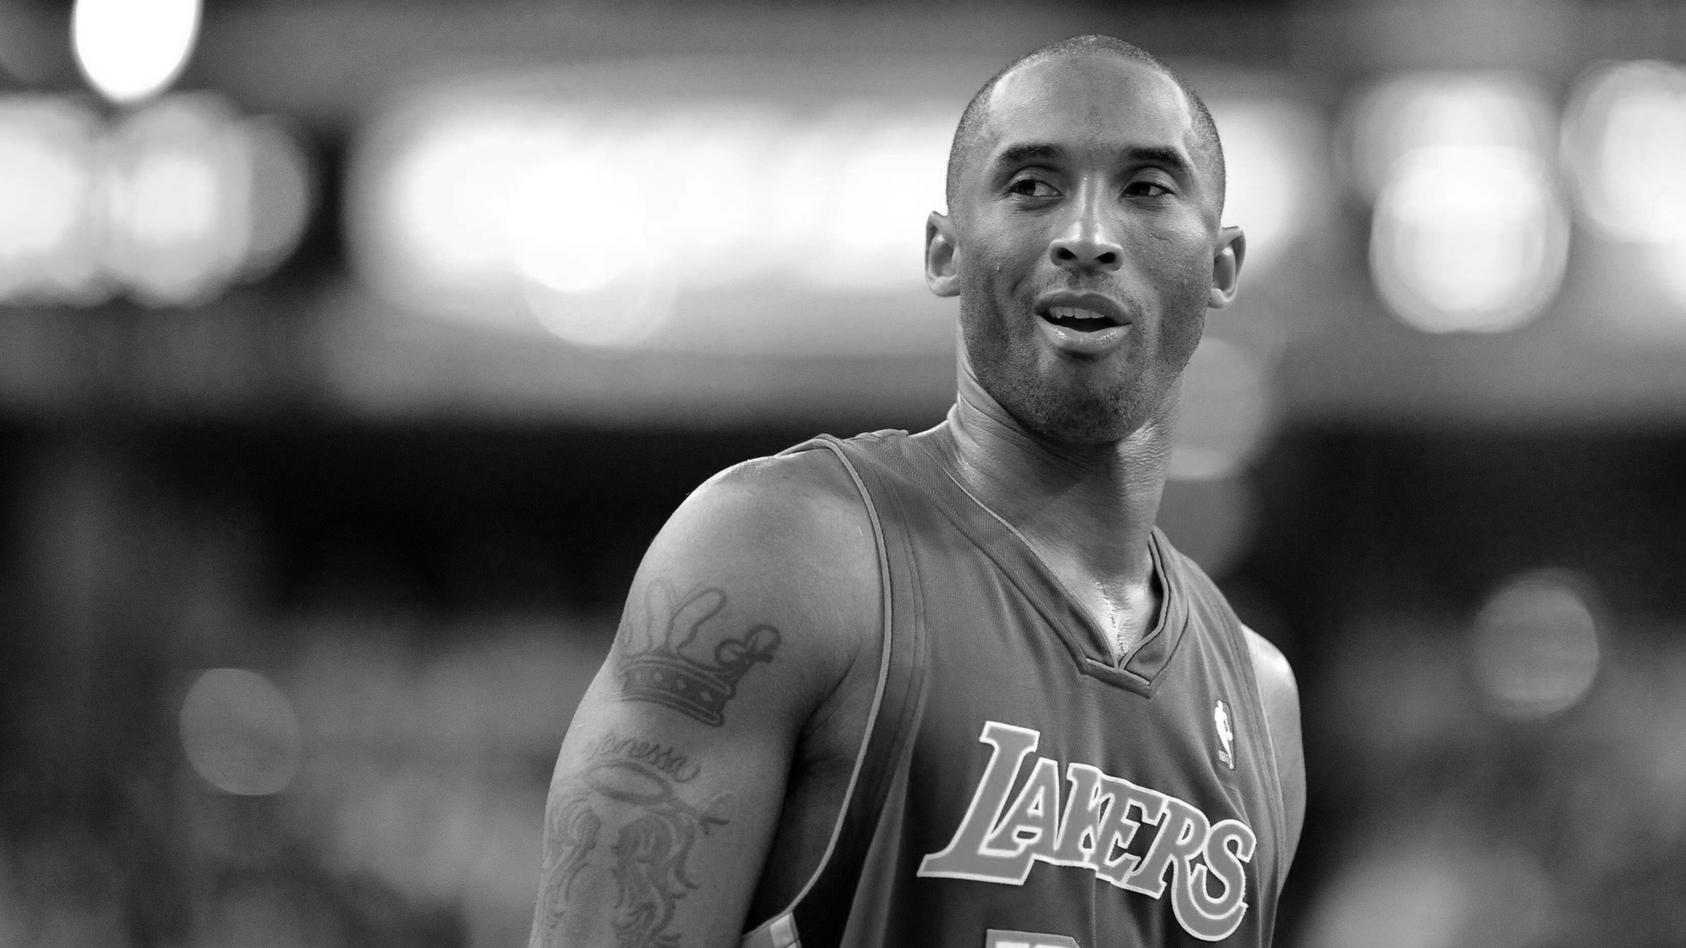  March 16, 2010: Kobe Bryant 24 of the Los Angeles Lakers during the game between the Sacramento Kings and the Los Angeles Lakers at Arco Arena in Sacramento, CA.   PUBLICATIONxINxGERxSUIxAUTxONLY - ZUMAcm3